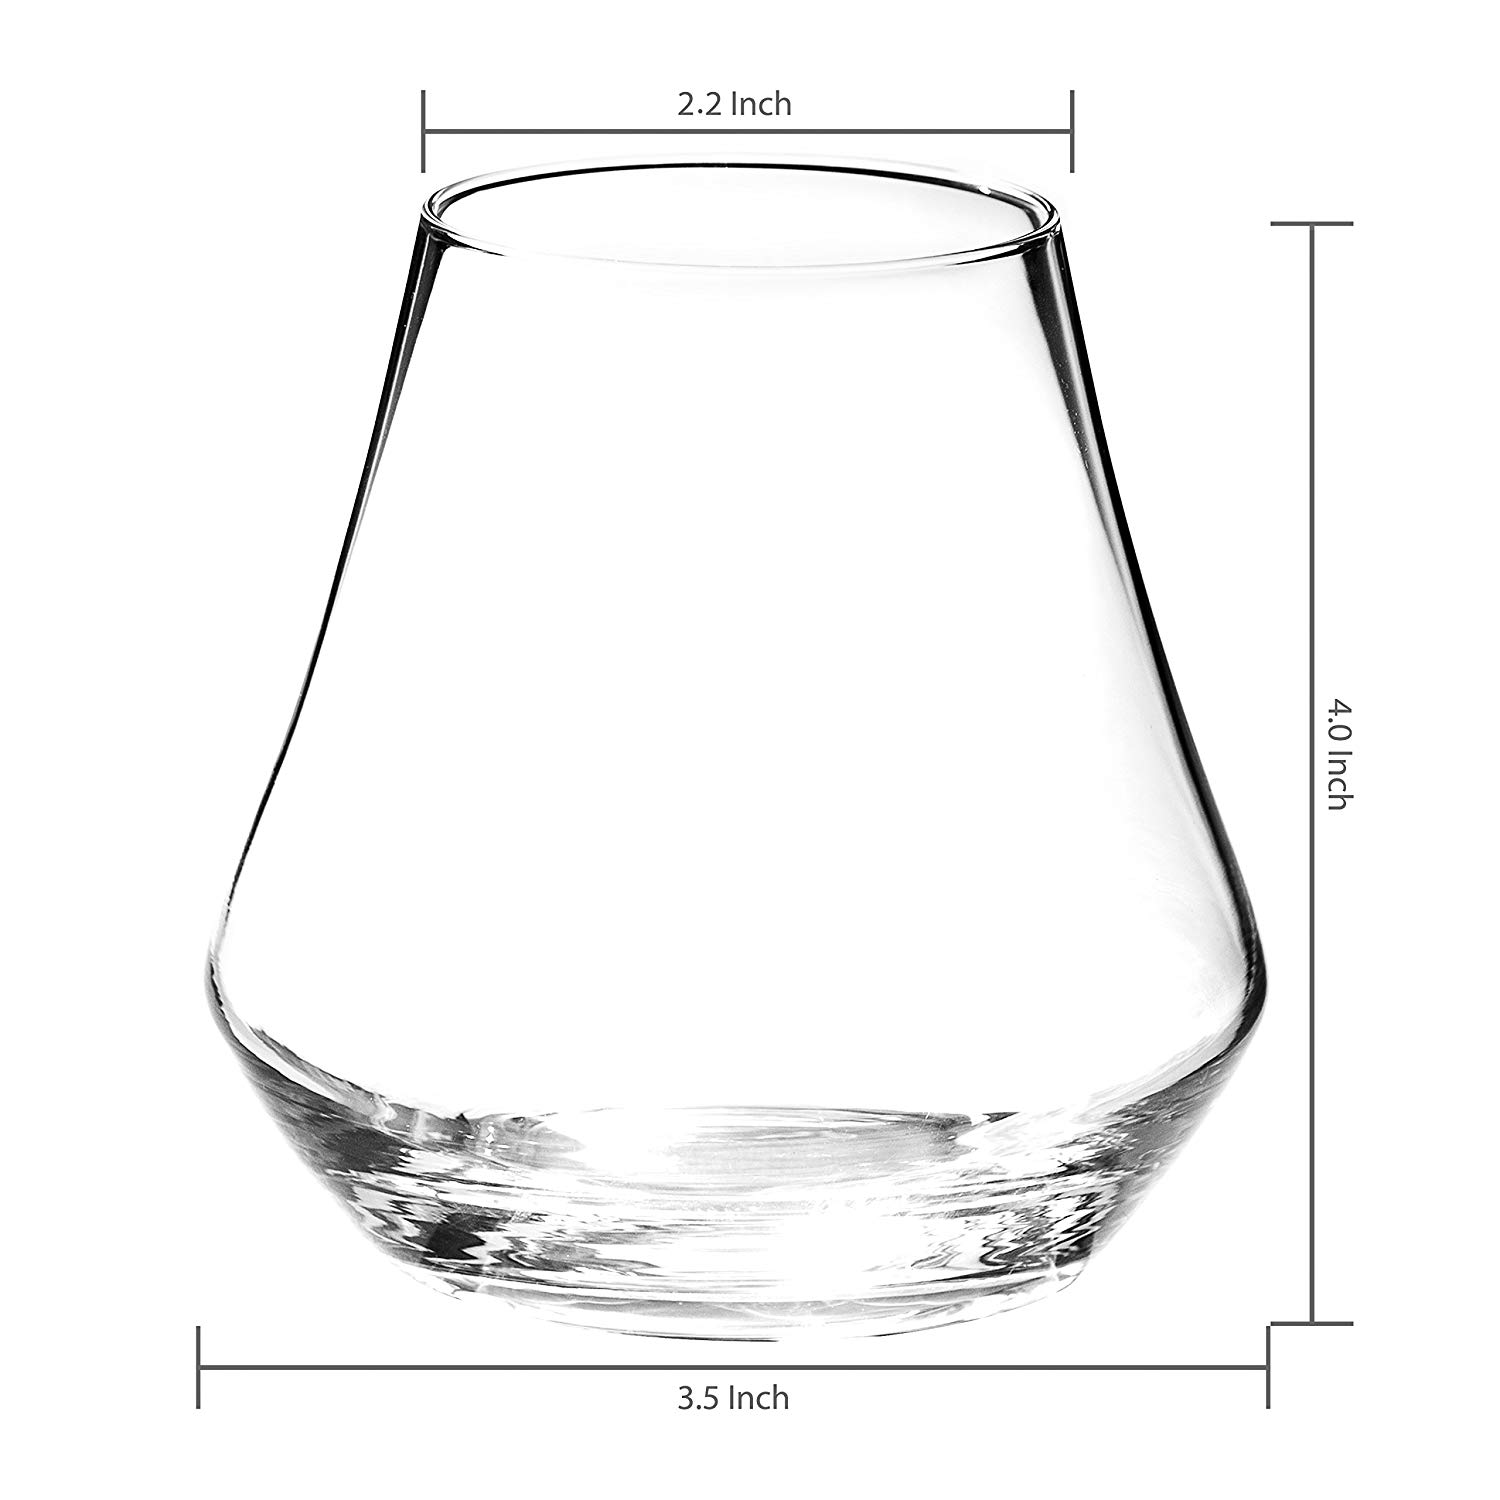 Super Purchasing for Metal Chilling Stones - Clear Crystal Tulip Shaped Whiskey Tasting Snifter Tumbler Glasses Gift Box Set of 4 – Shunstone